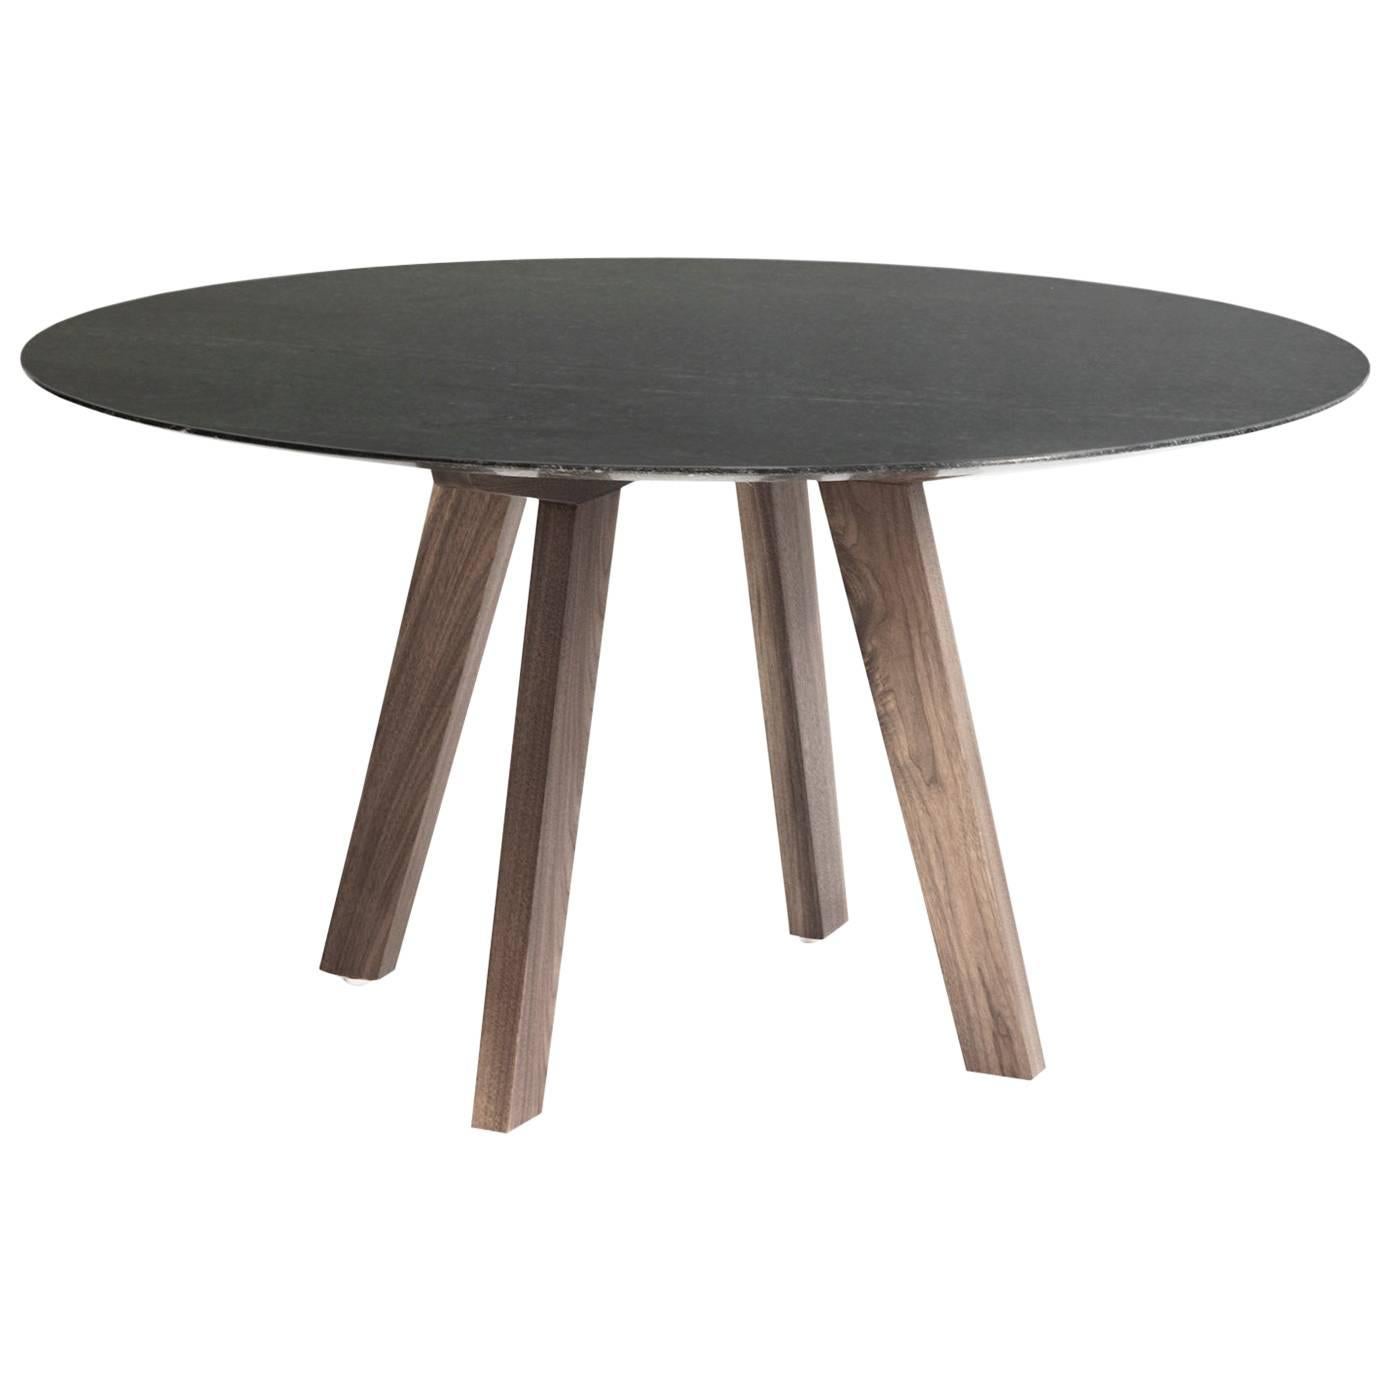 Contemporary Round Table, Granite and Walnut, Designed by LCMX For Sale